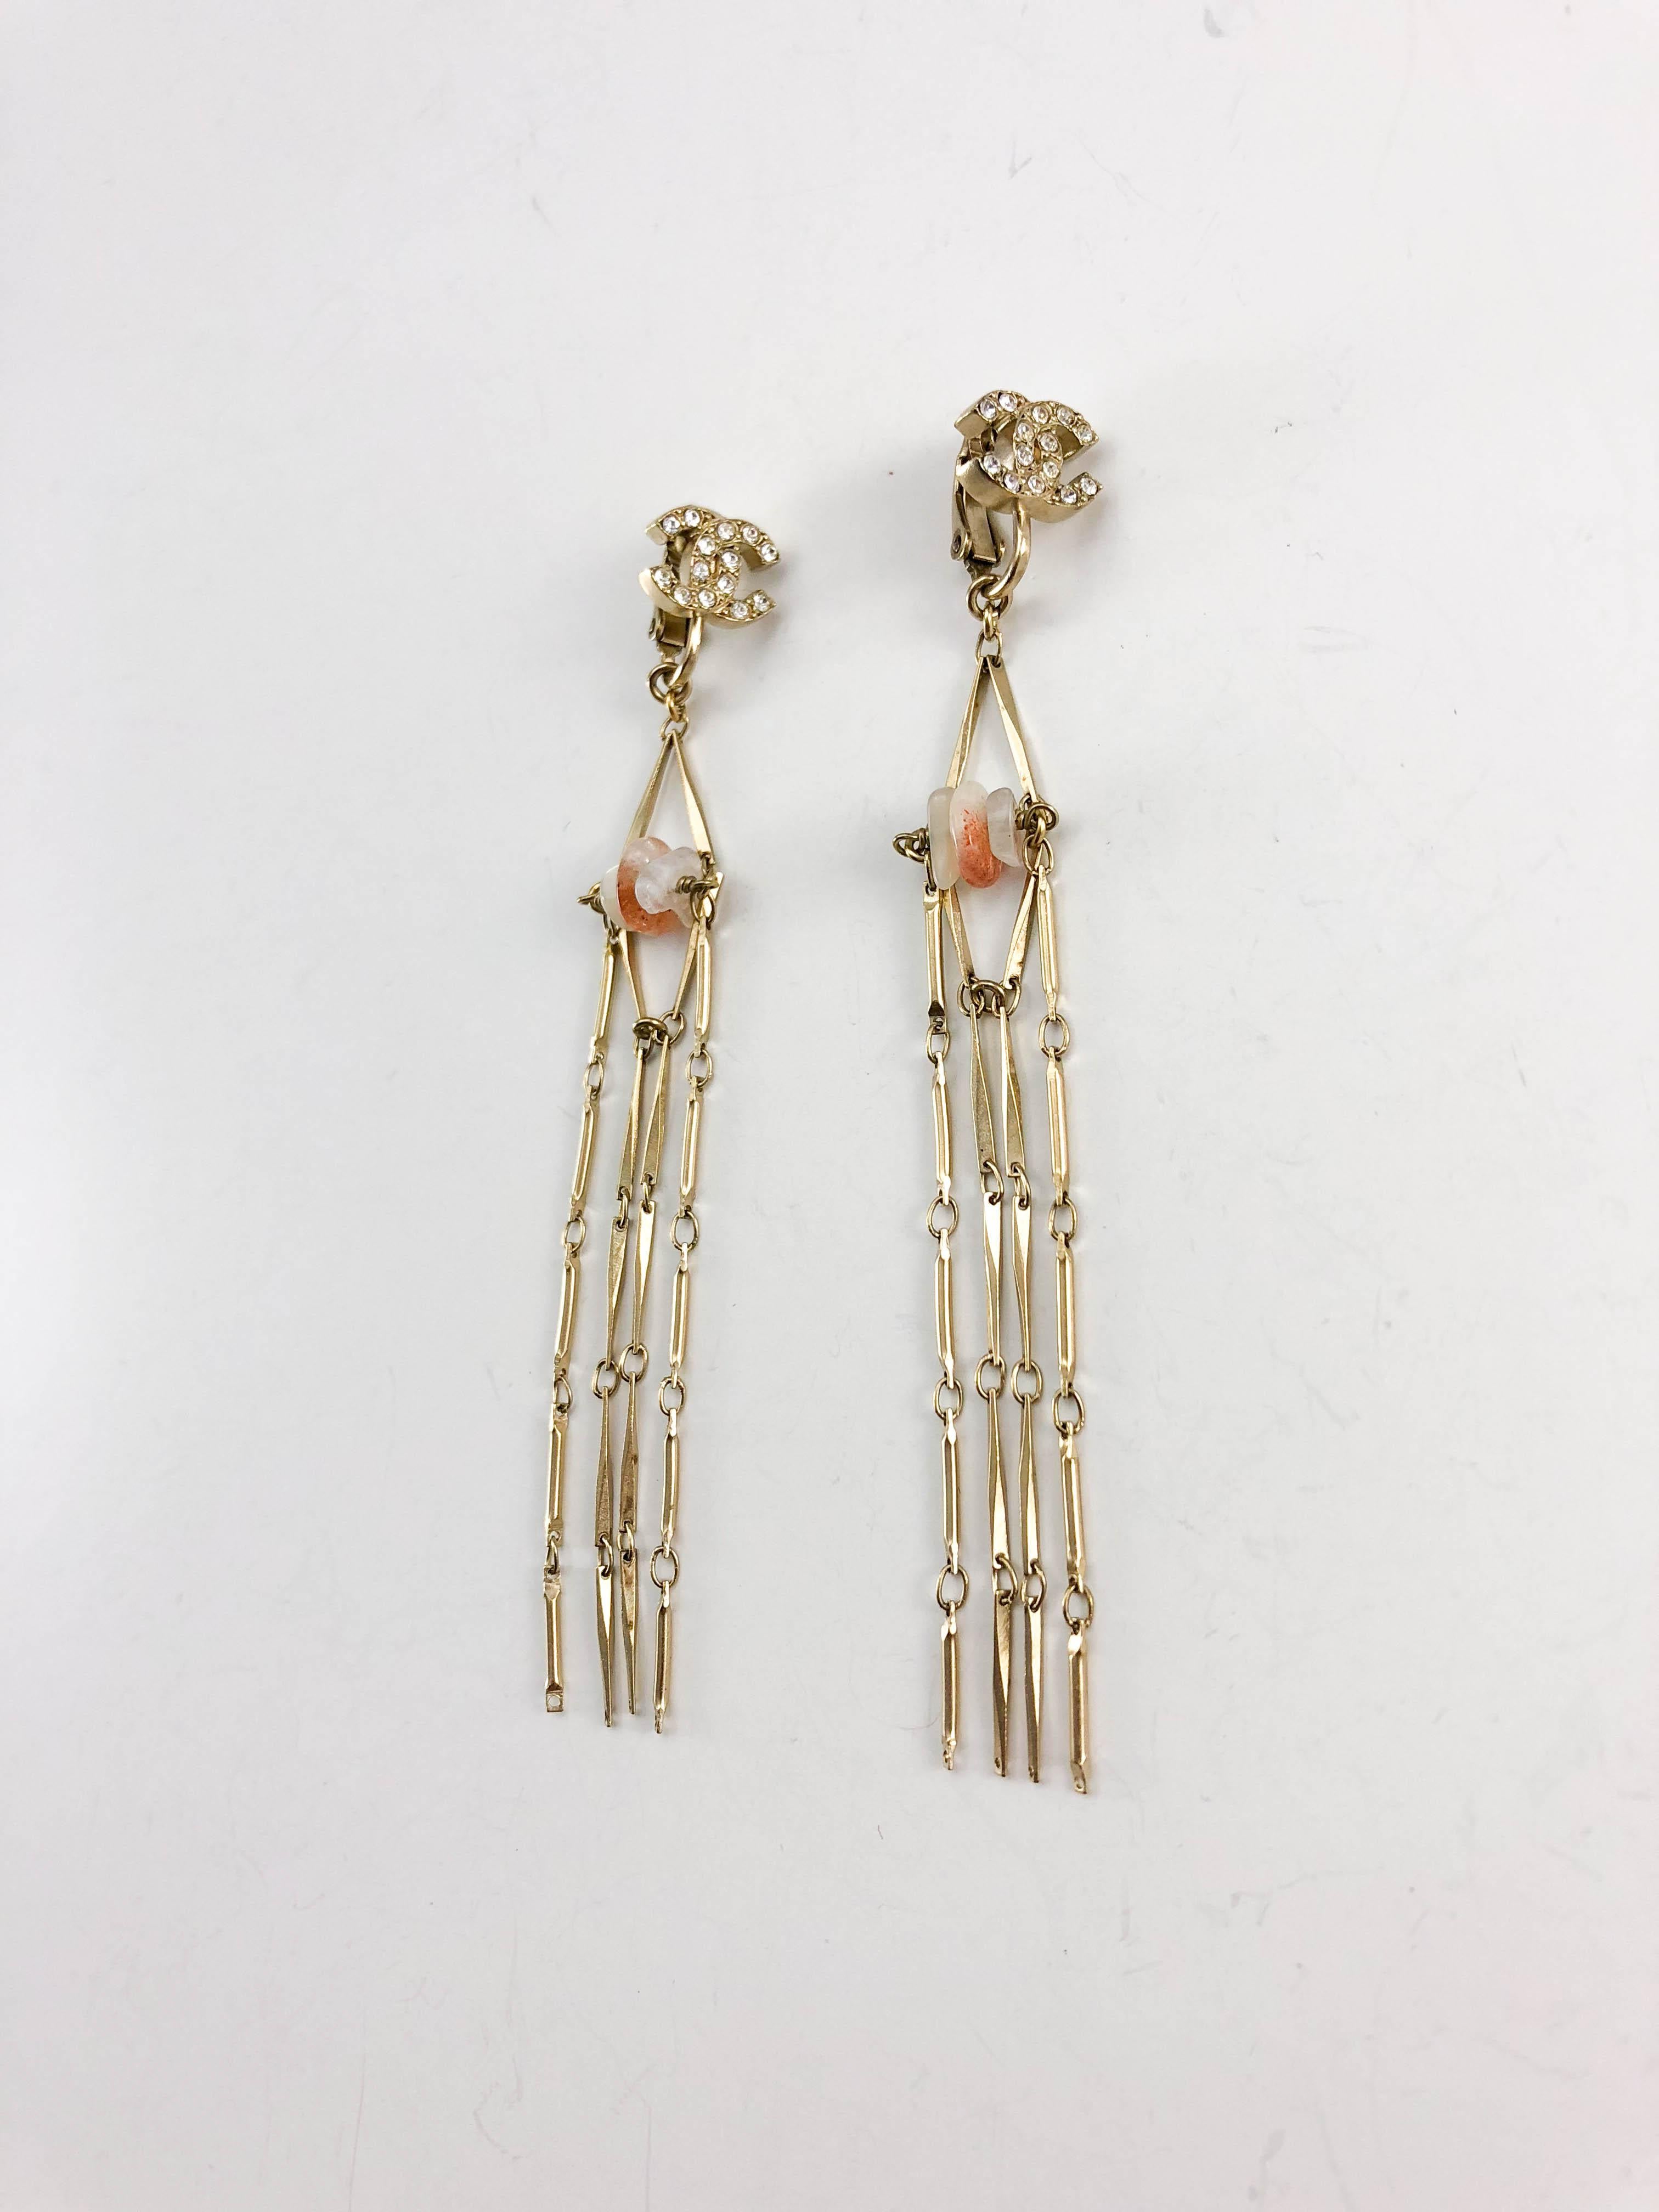 Chanel Long Gilt Dangling Earrings with Agate. These stylish earrings by Chanel earrings were crafted for the 2011 Cruise Collection. The collection was presented in Saint Tropez, and the easy-going sophistication of the French Riviera was all over